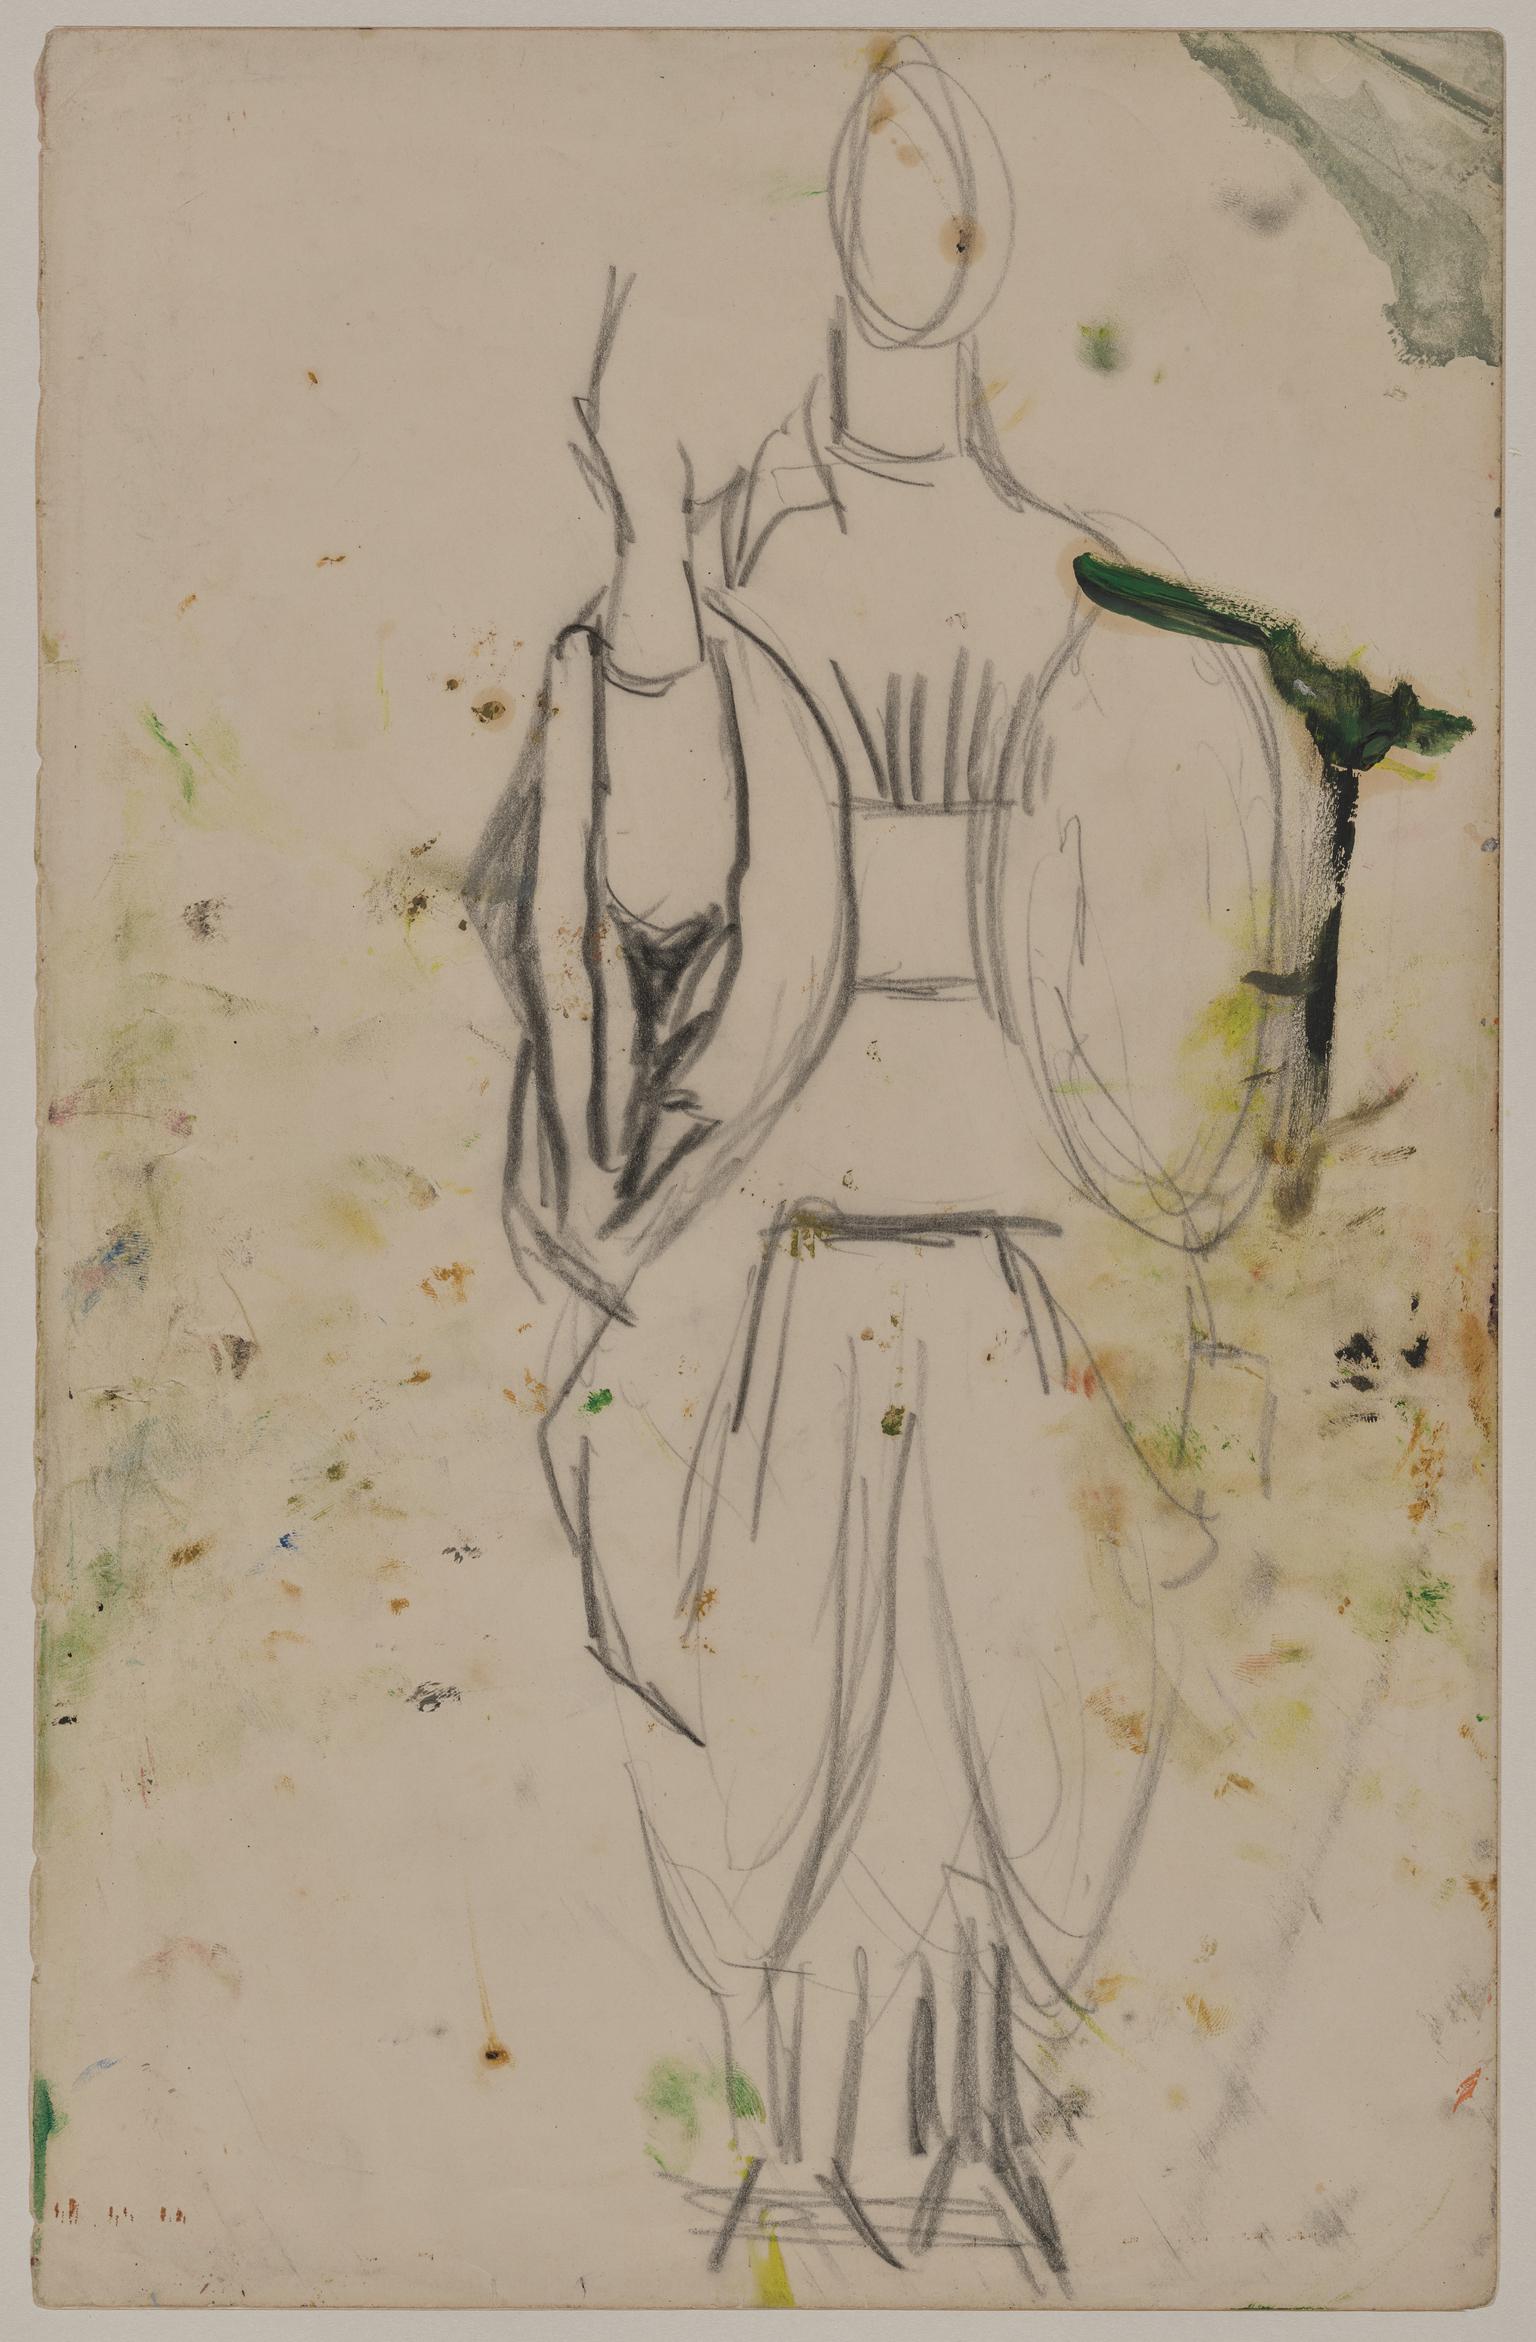 Study for central figure